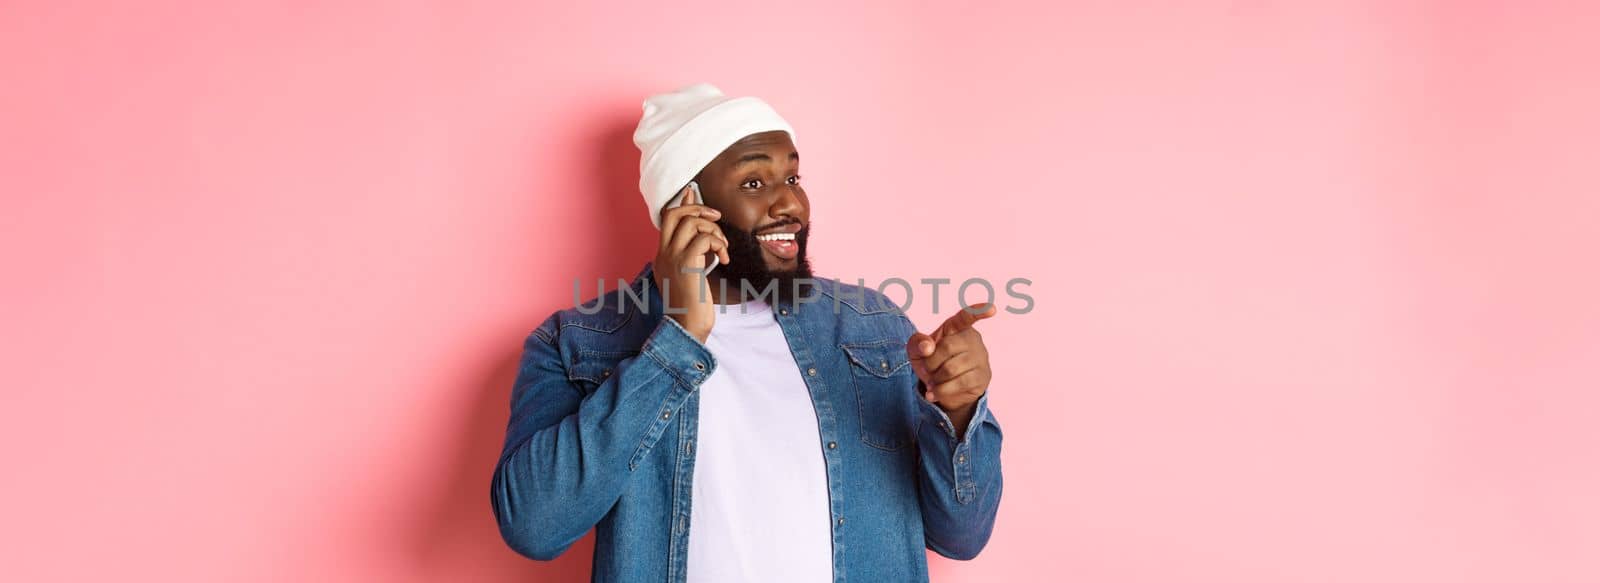 Handsome modern Black man talking on mobile phone, pointing left at person and smiling, standing over pink background.